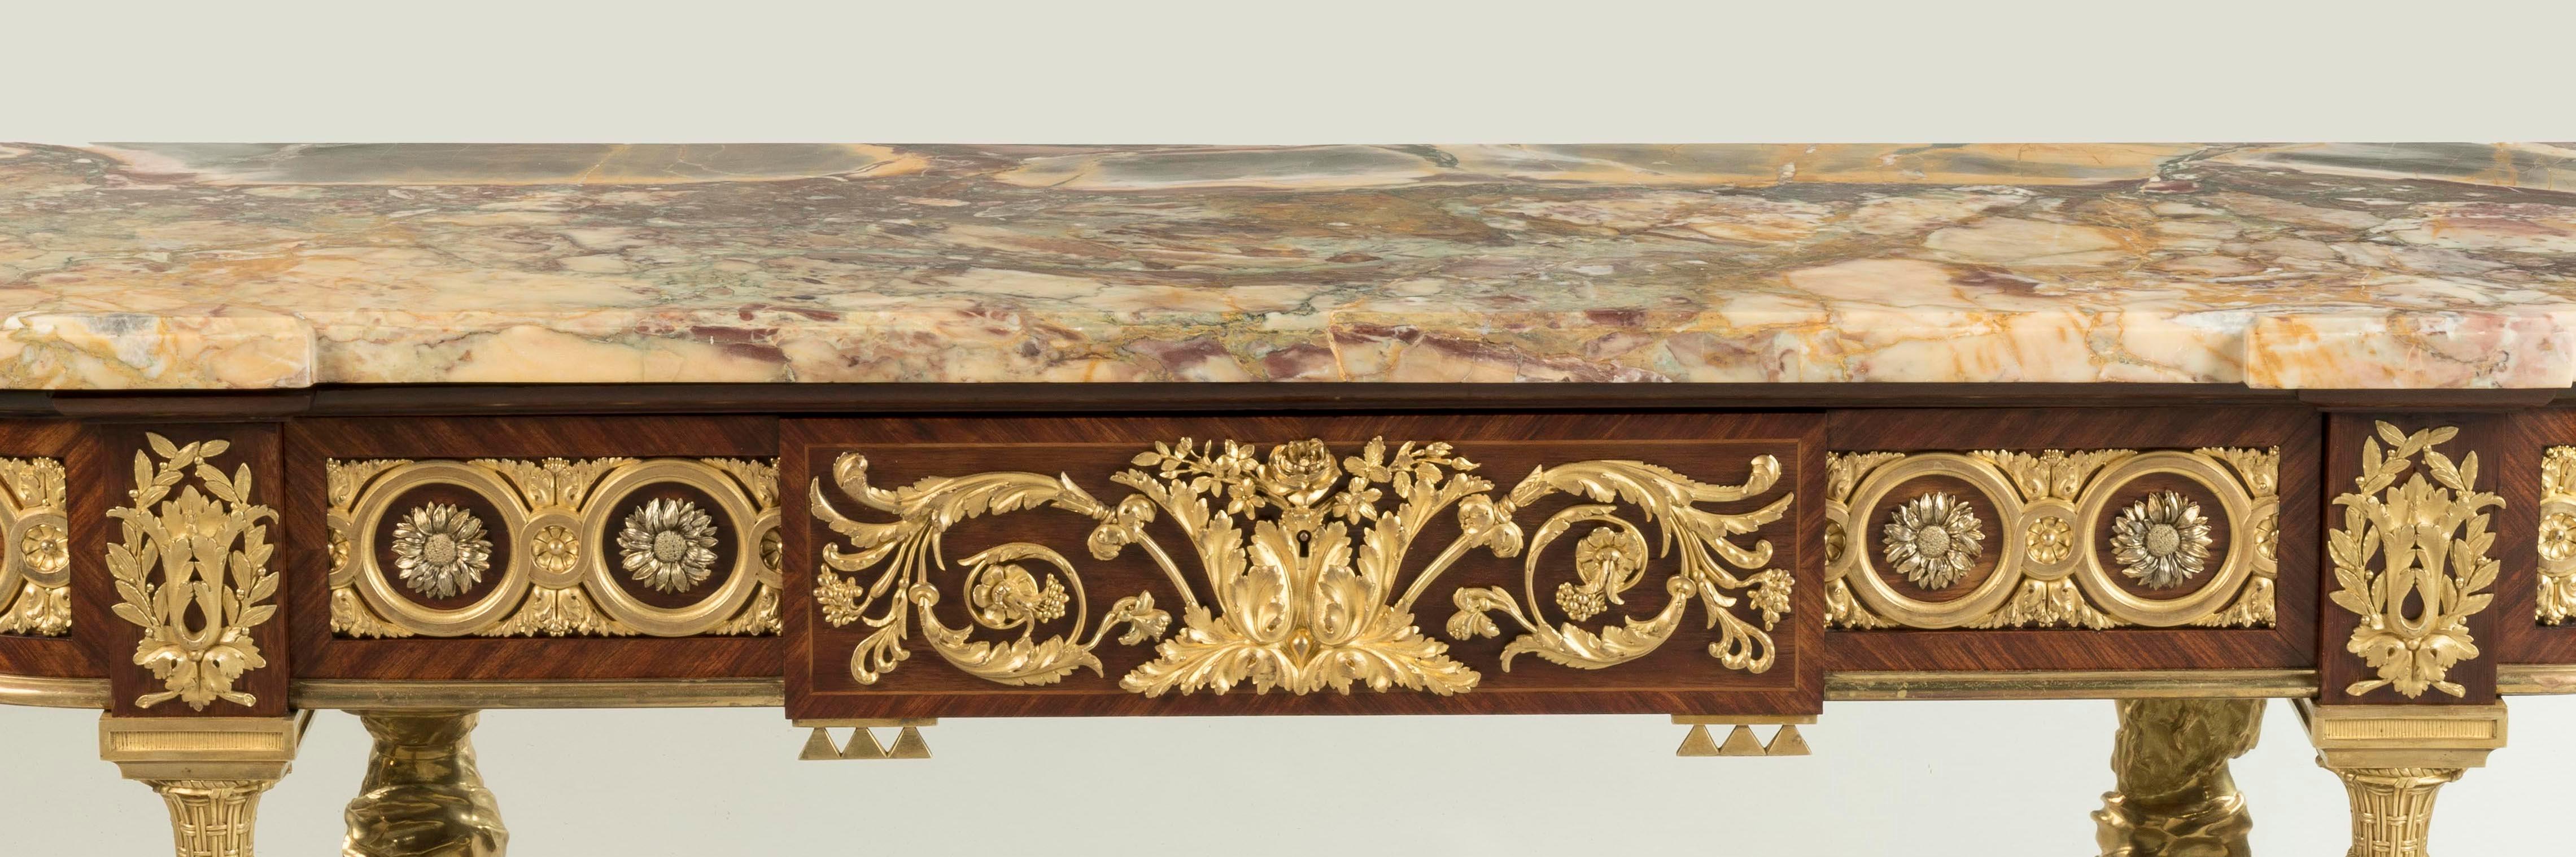 19th Century French Ormolu-Mounted Kingwood Console Table in the Louis XVI Style For Sale 5